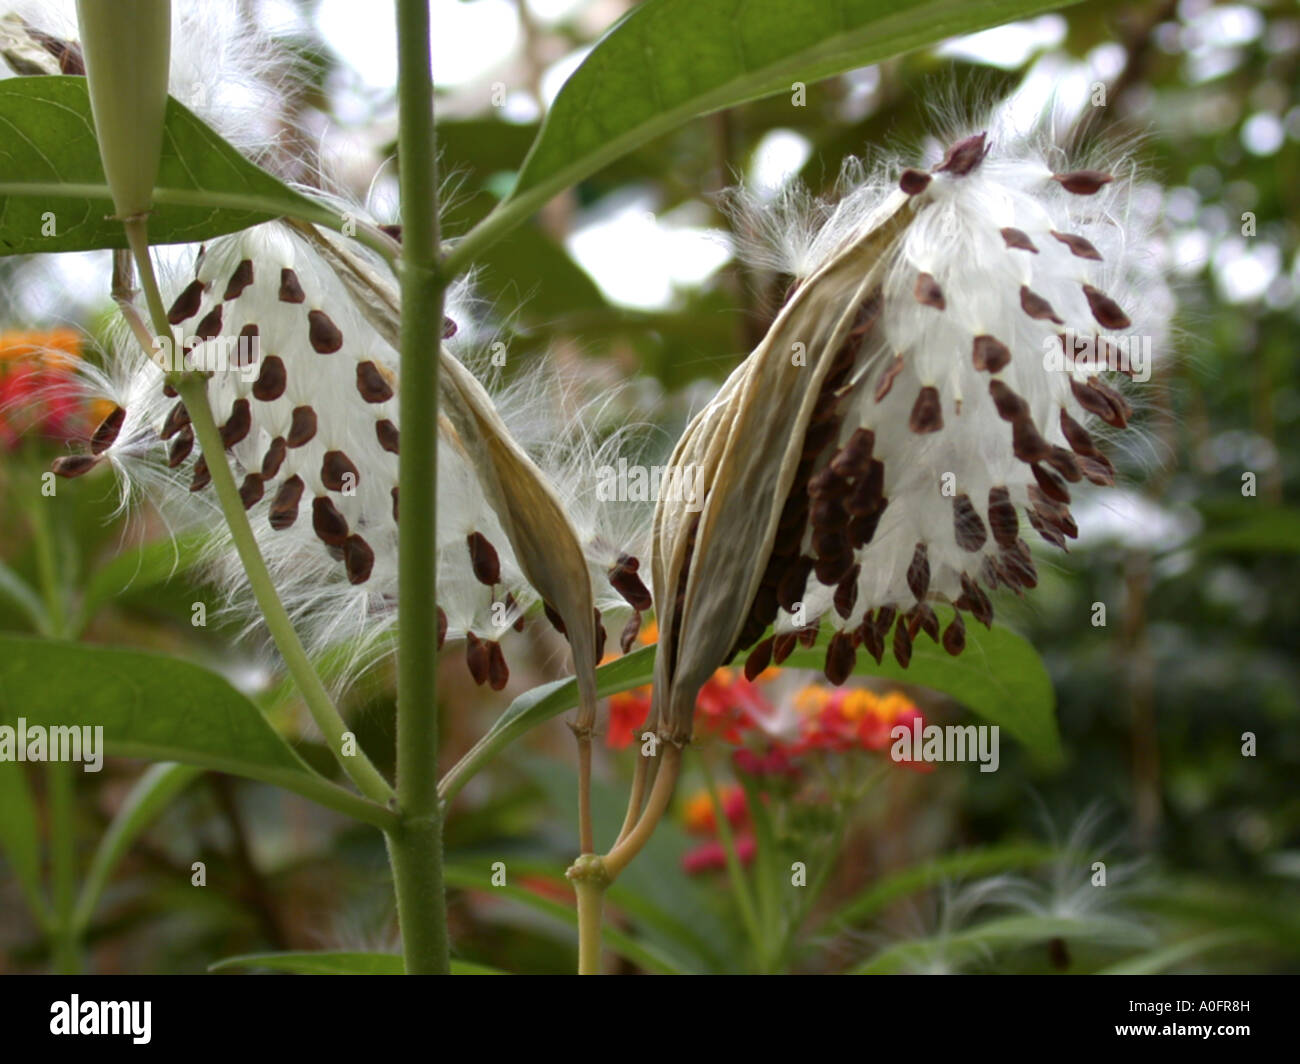 butterfly weed, lau-lele, blood flower (Asclepias curassavica), opened fruits Stock Photo